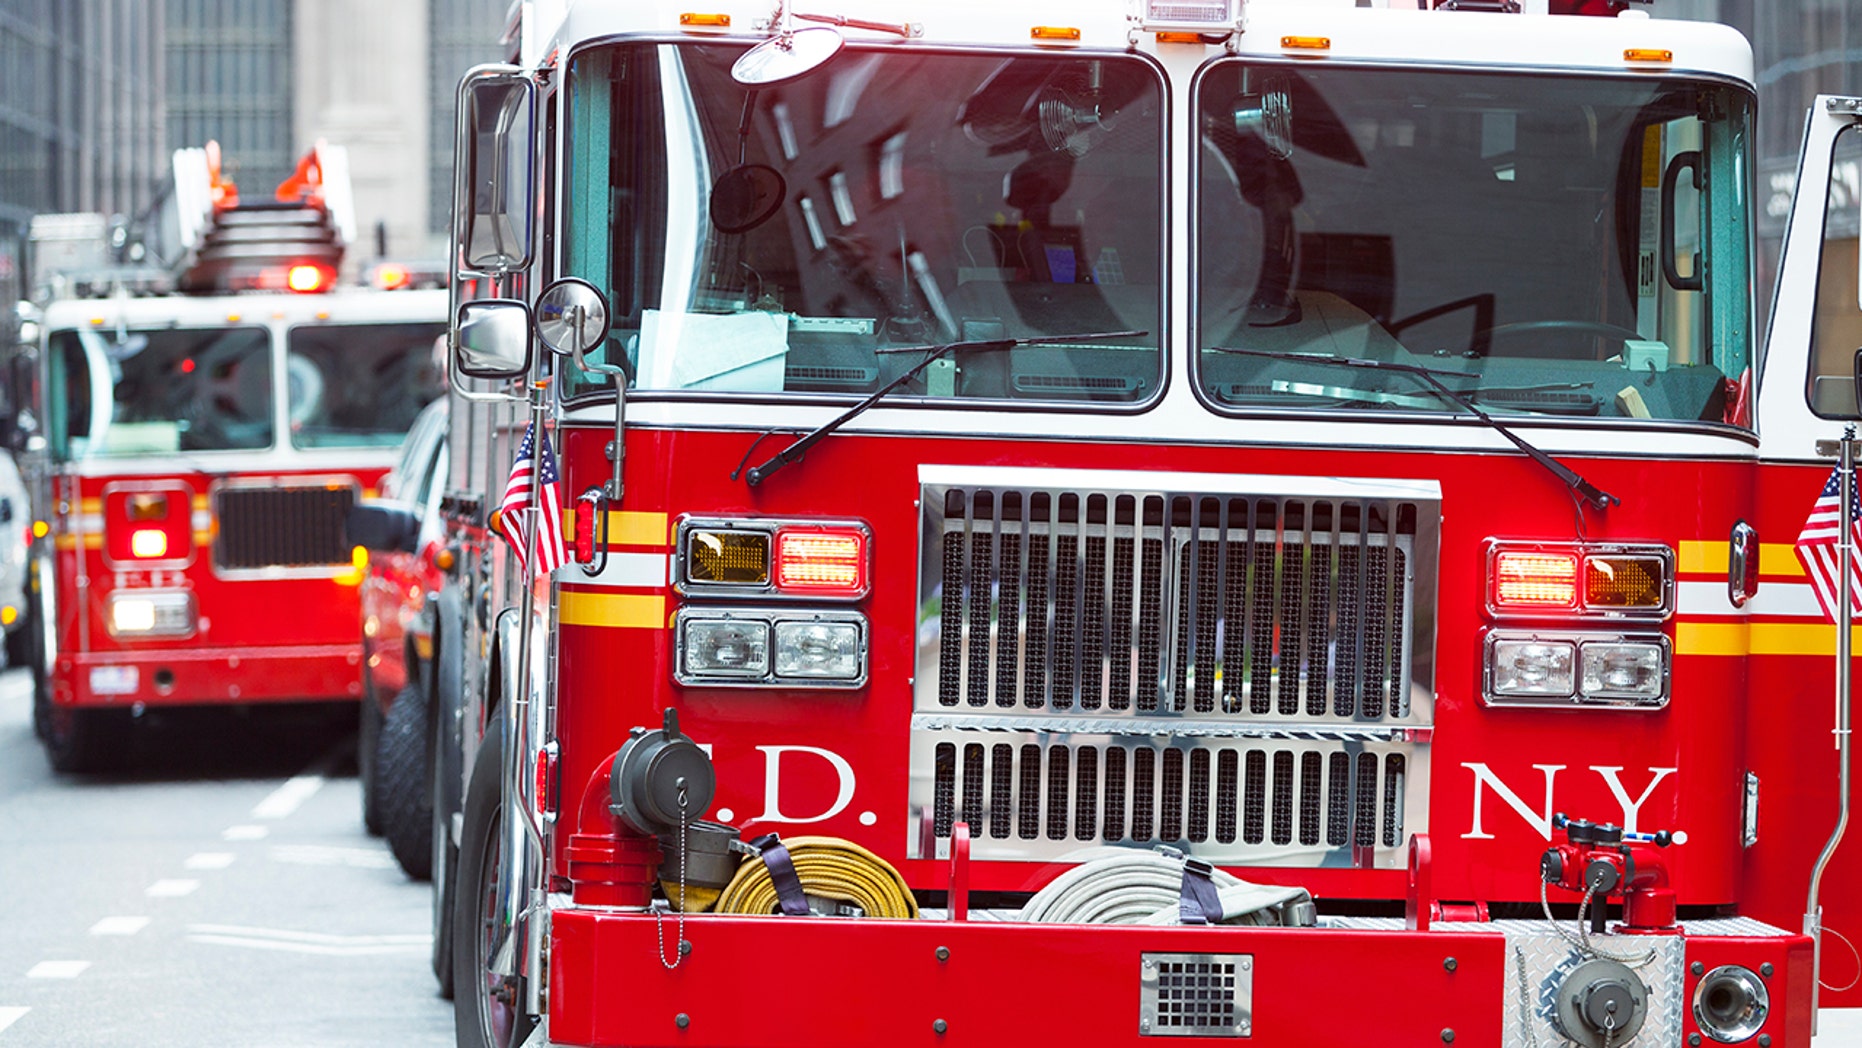 A white firefighter has sued the FDNY after claiming he was barred from participating in a color guard ceremony honoring deceased members of the Vulcan Society -- a fraternal organization of black firefighters